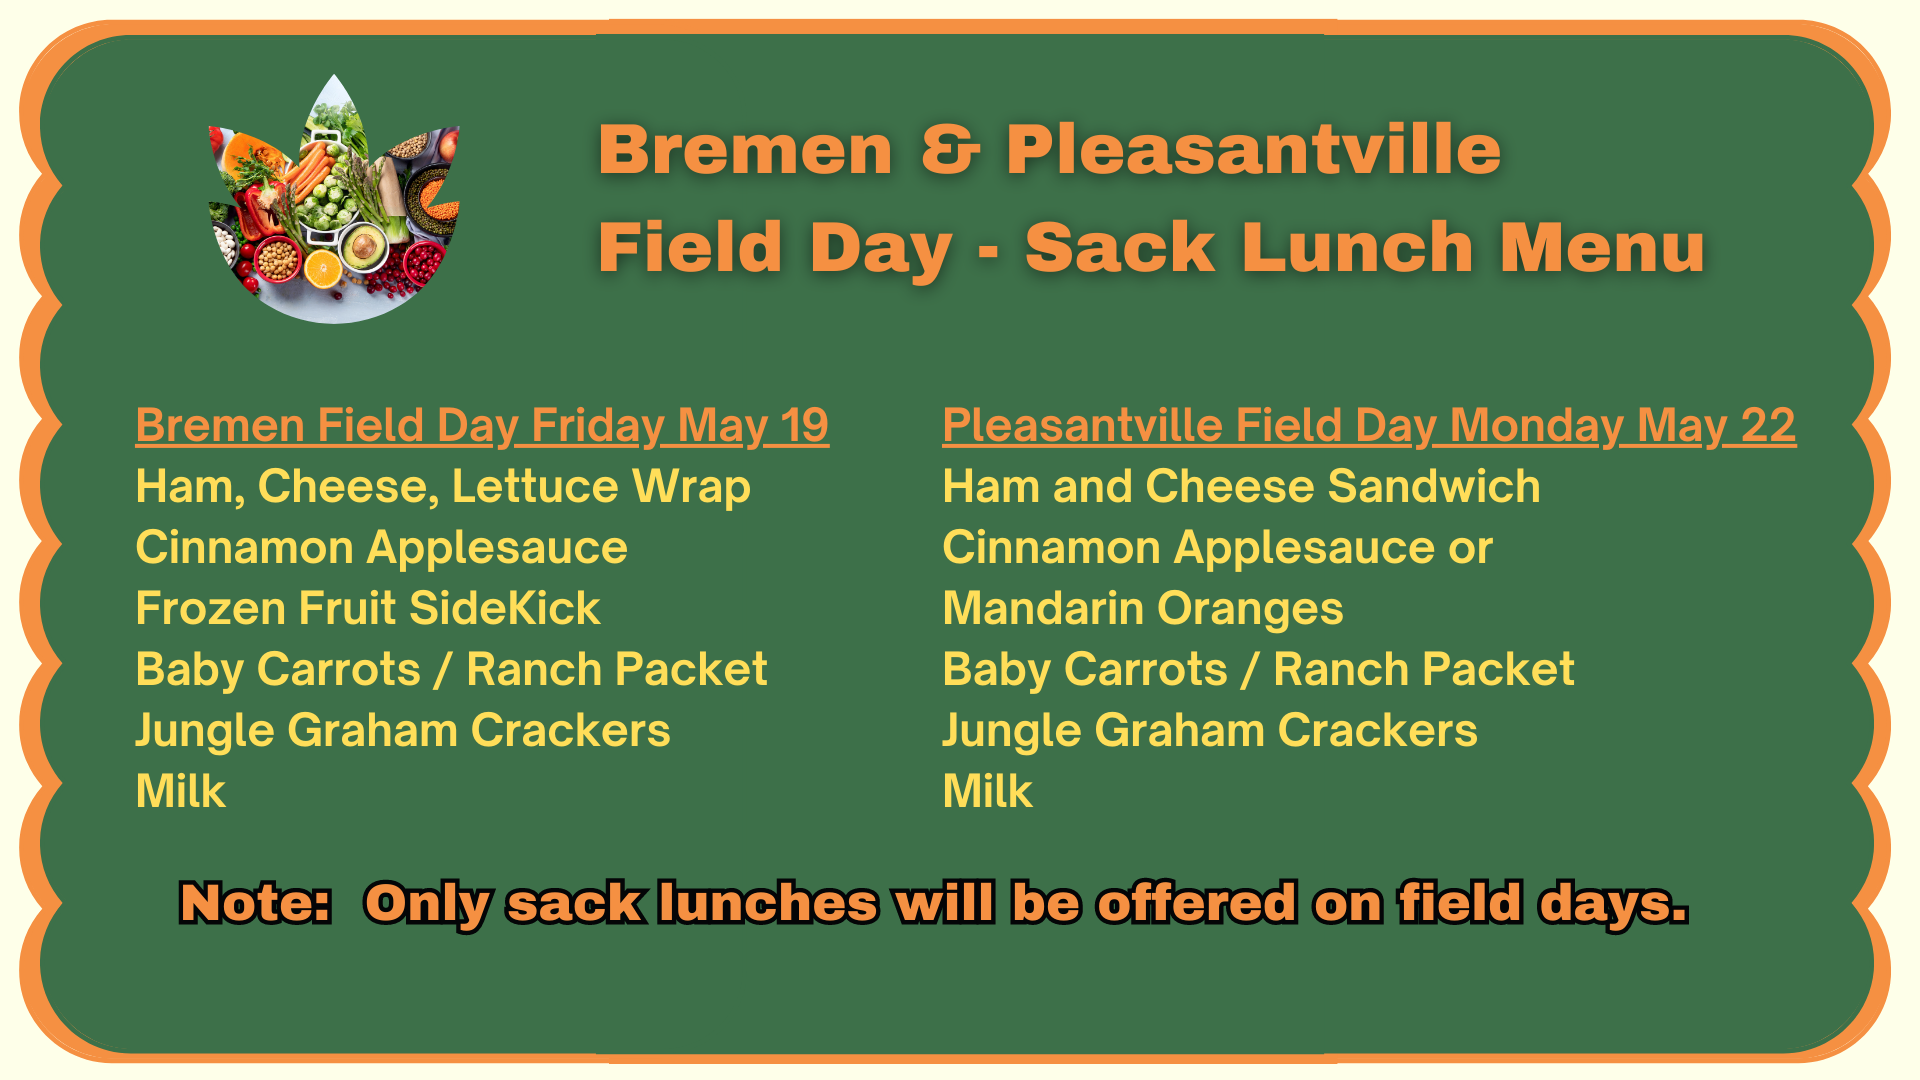 Field Day Lunches - only sack lunches will be served on field days.